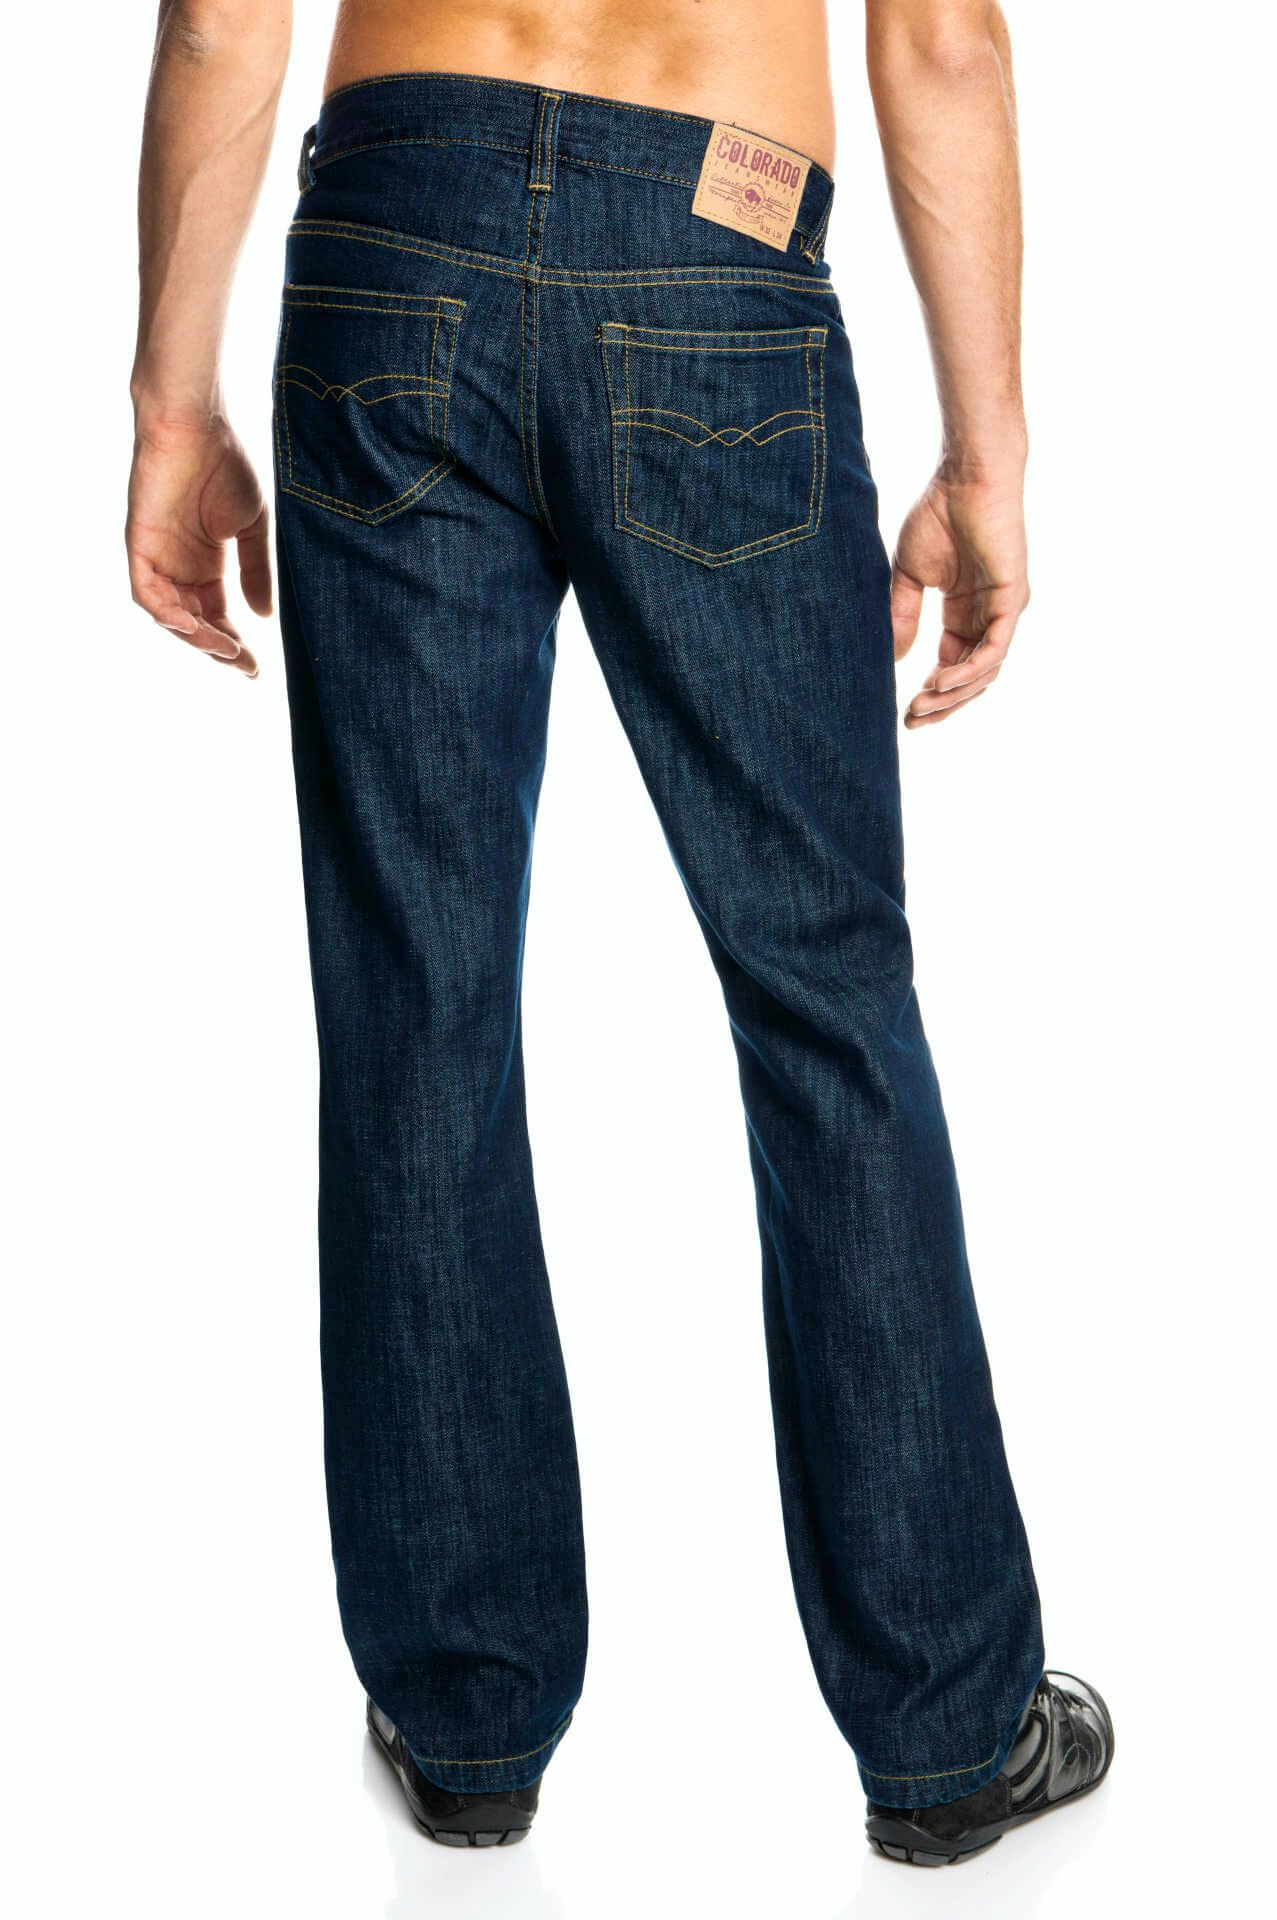 Colorado Jeans US First